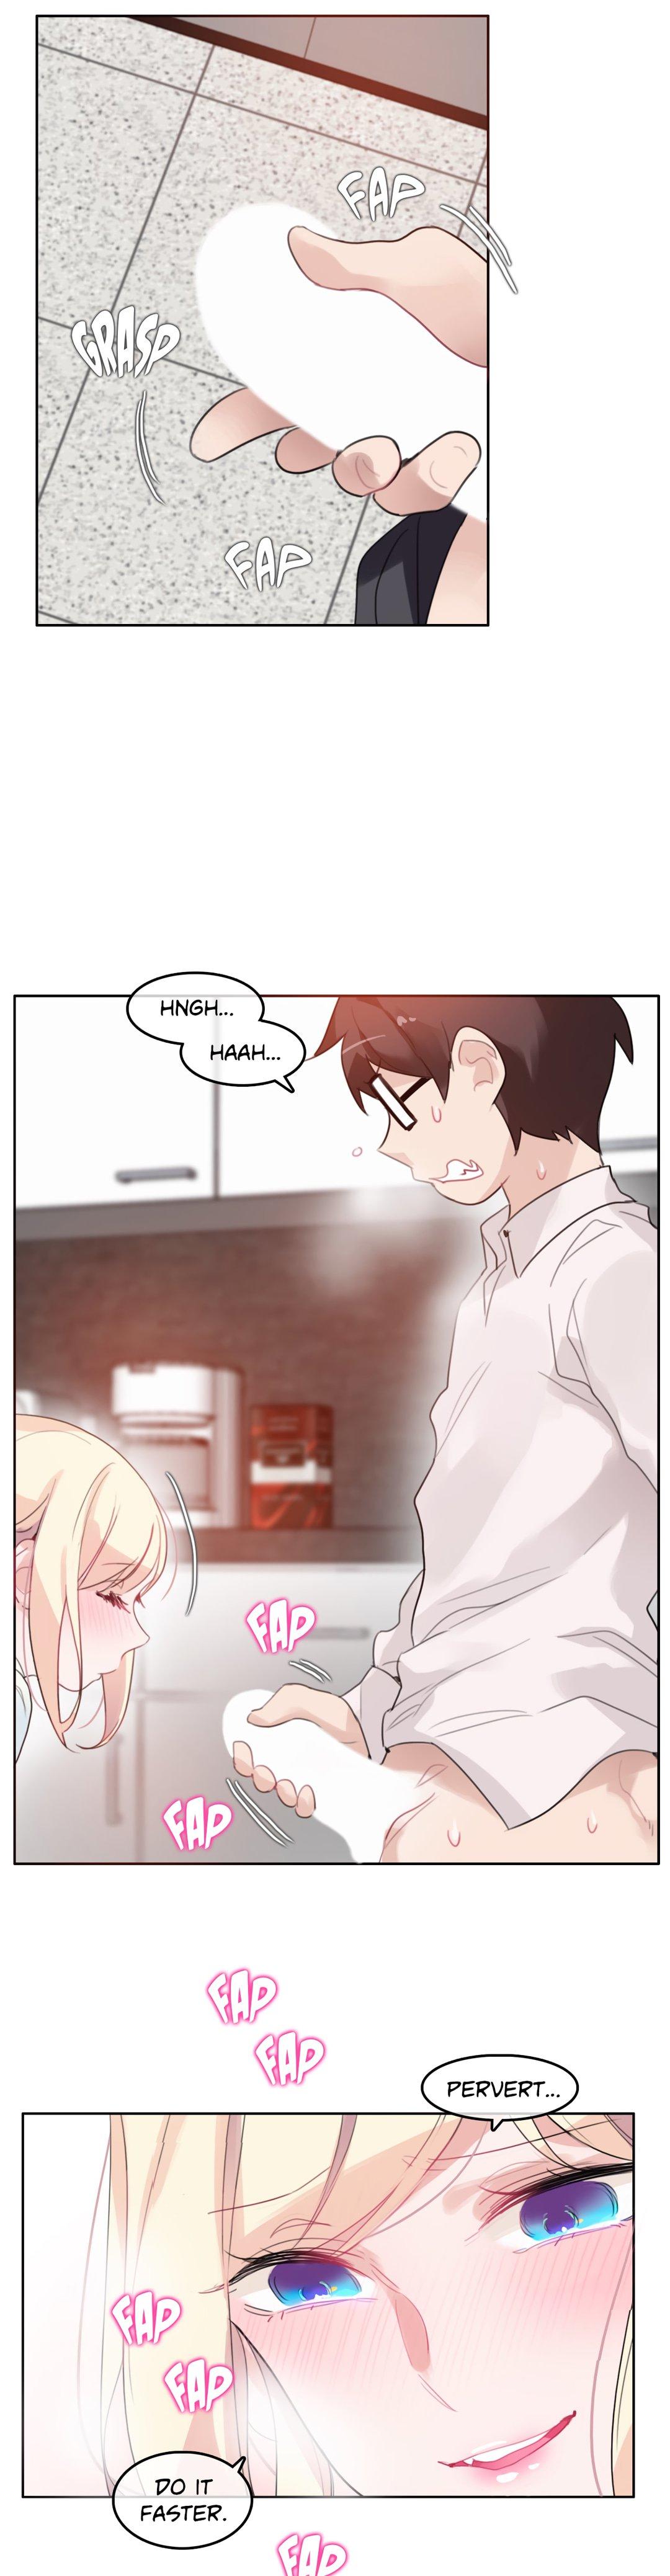 A Pervert's Daily Life • Chapter 31-35 40